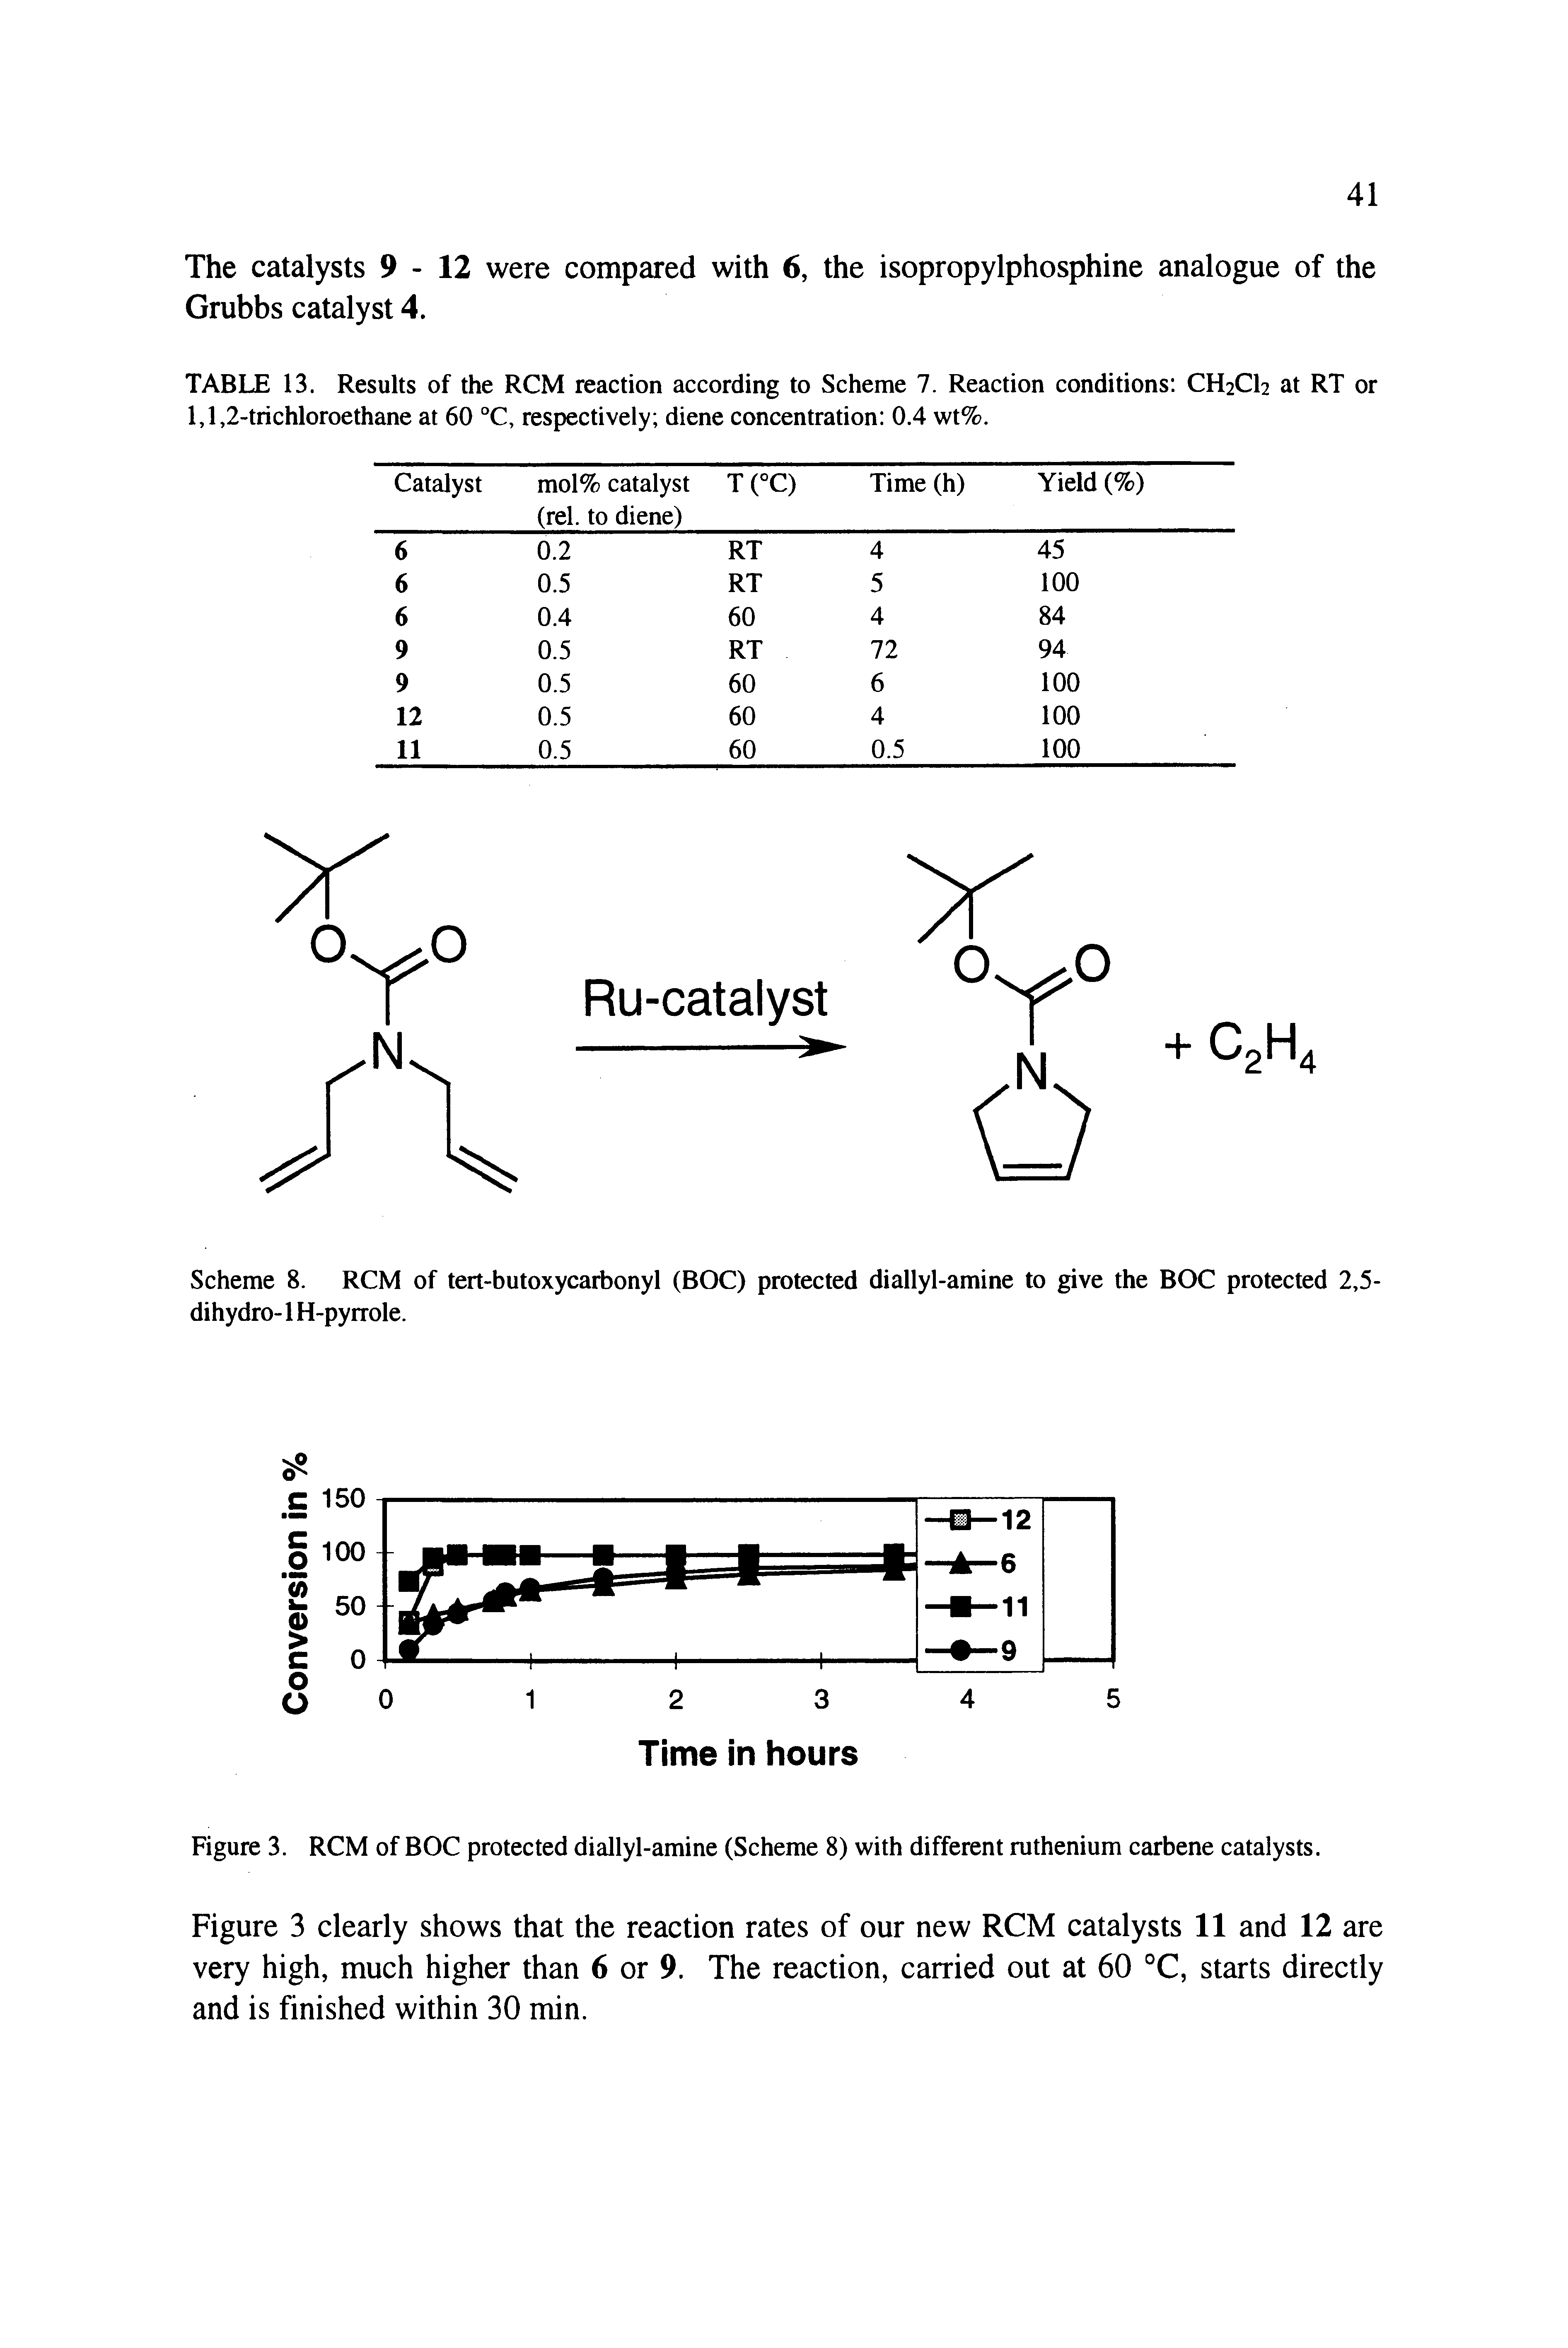 Figure 3. RCM of BOC protected diallyl-amine (Scheme 8) with different ruthenium carbene catalysts.